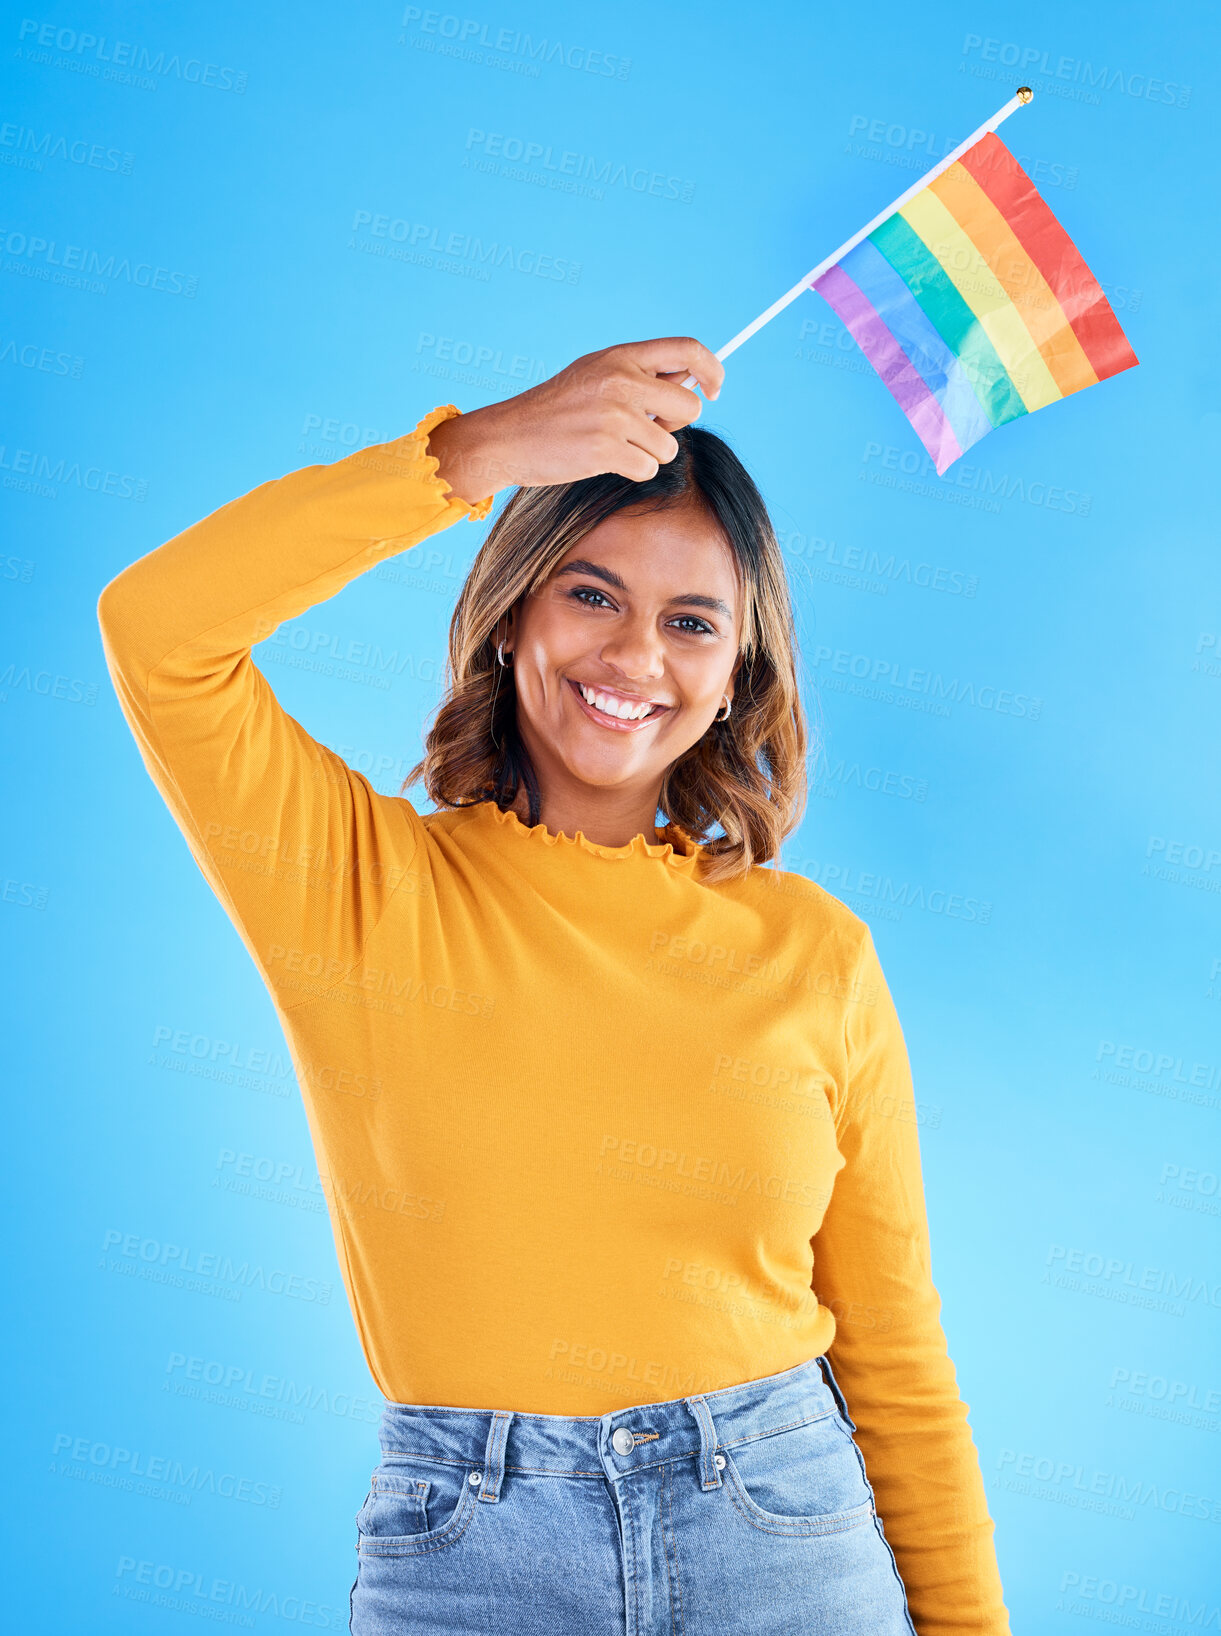 Buy stock photo Portrait, rainbow flag and gay pride with a woman on a blue background in studio feeling proud of her lgbt status. Smile, freedom and equality with a happy young female holding a symbol of inclusion